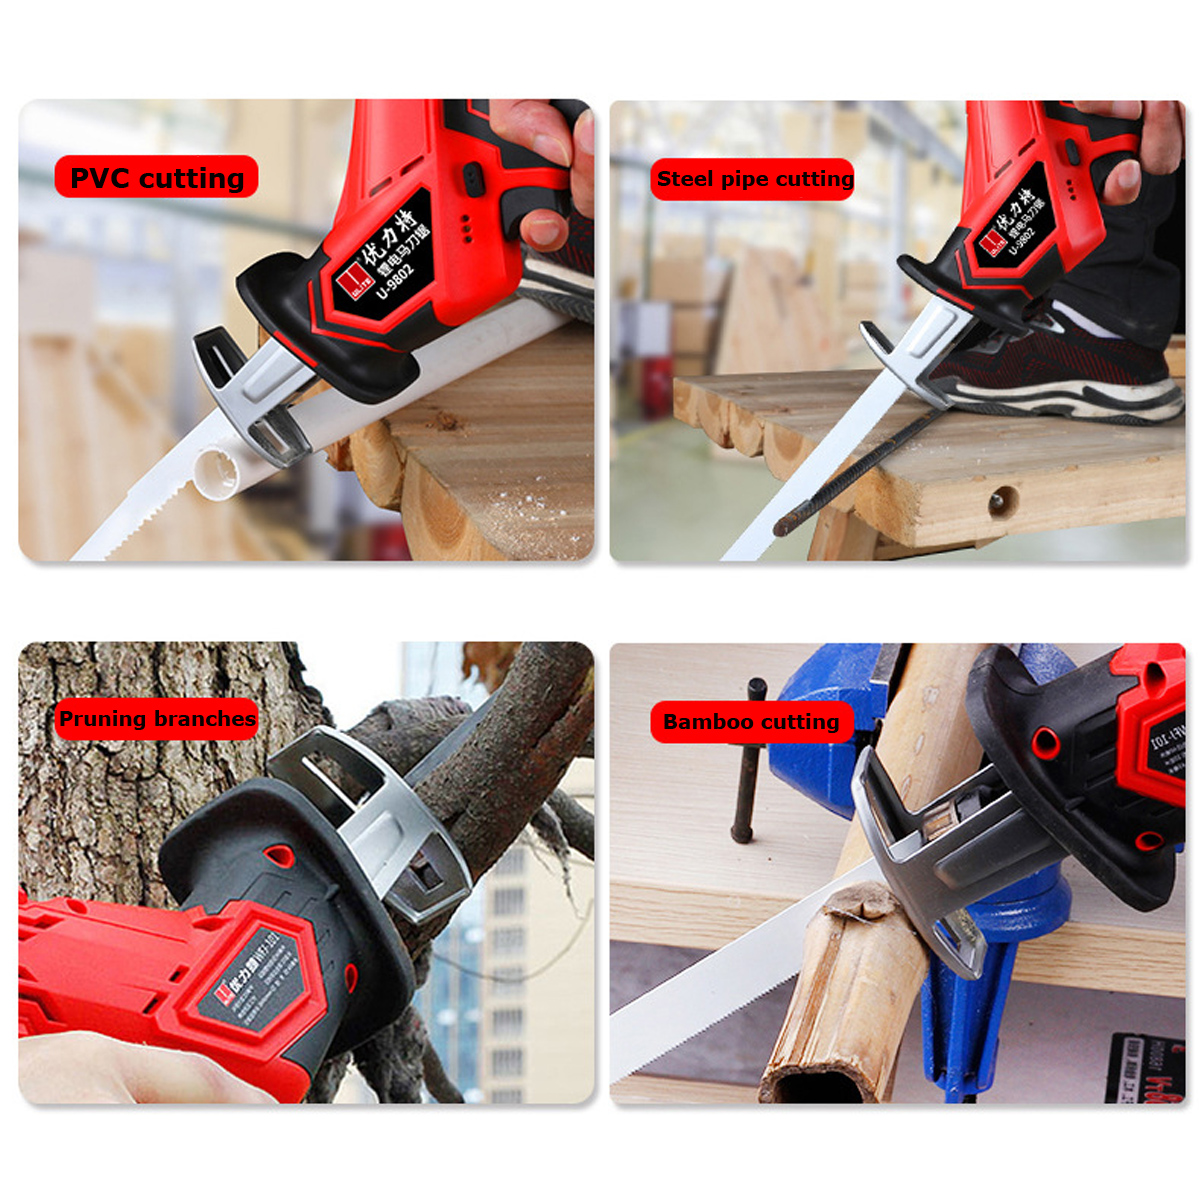 12V Electric Reciprocating Saw Reciprocating Sabre Cutting Pruning Saw Woodworking Metal Saws